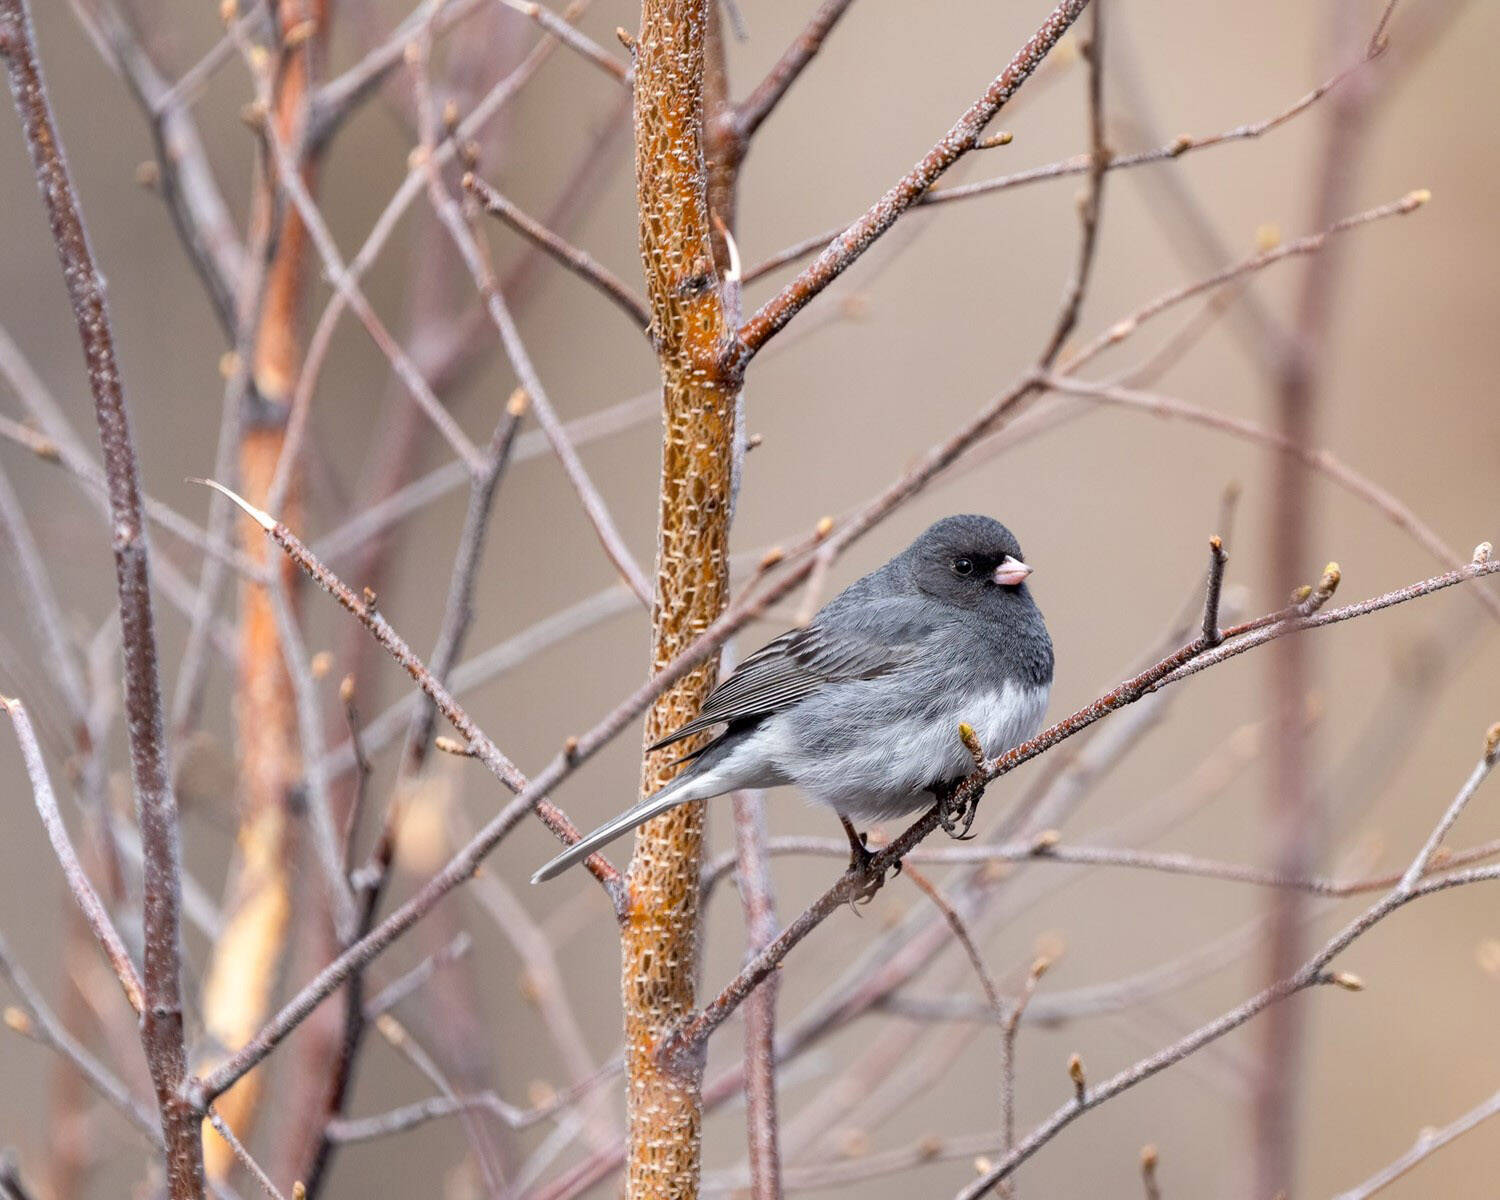 A dark-eyed junco is a bird species that likes to nest in slash and wood piles. (Photo by Colin Canterbury/FWS)